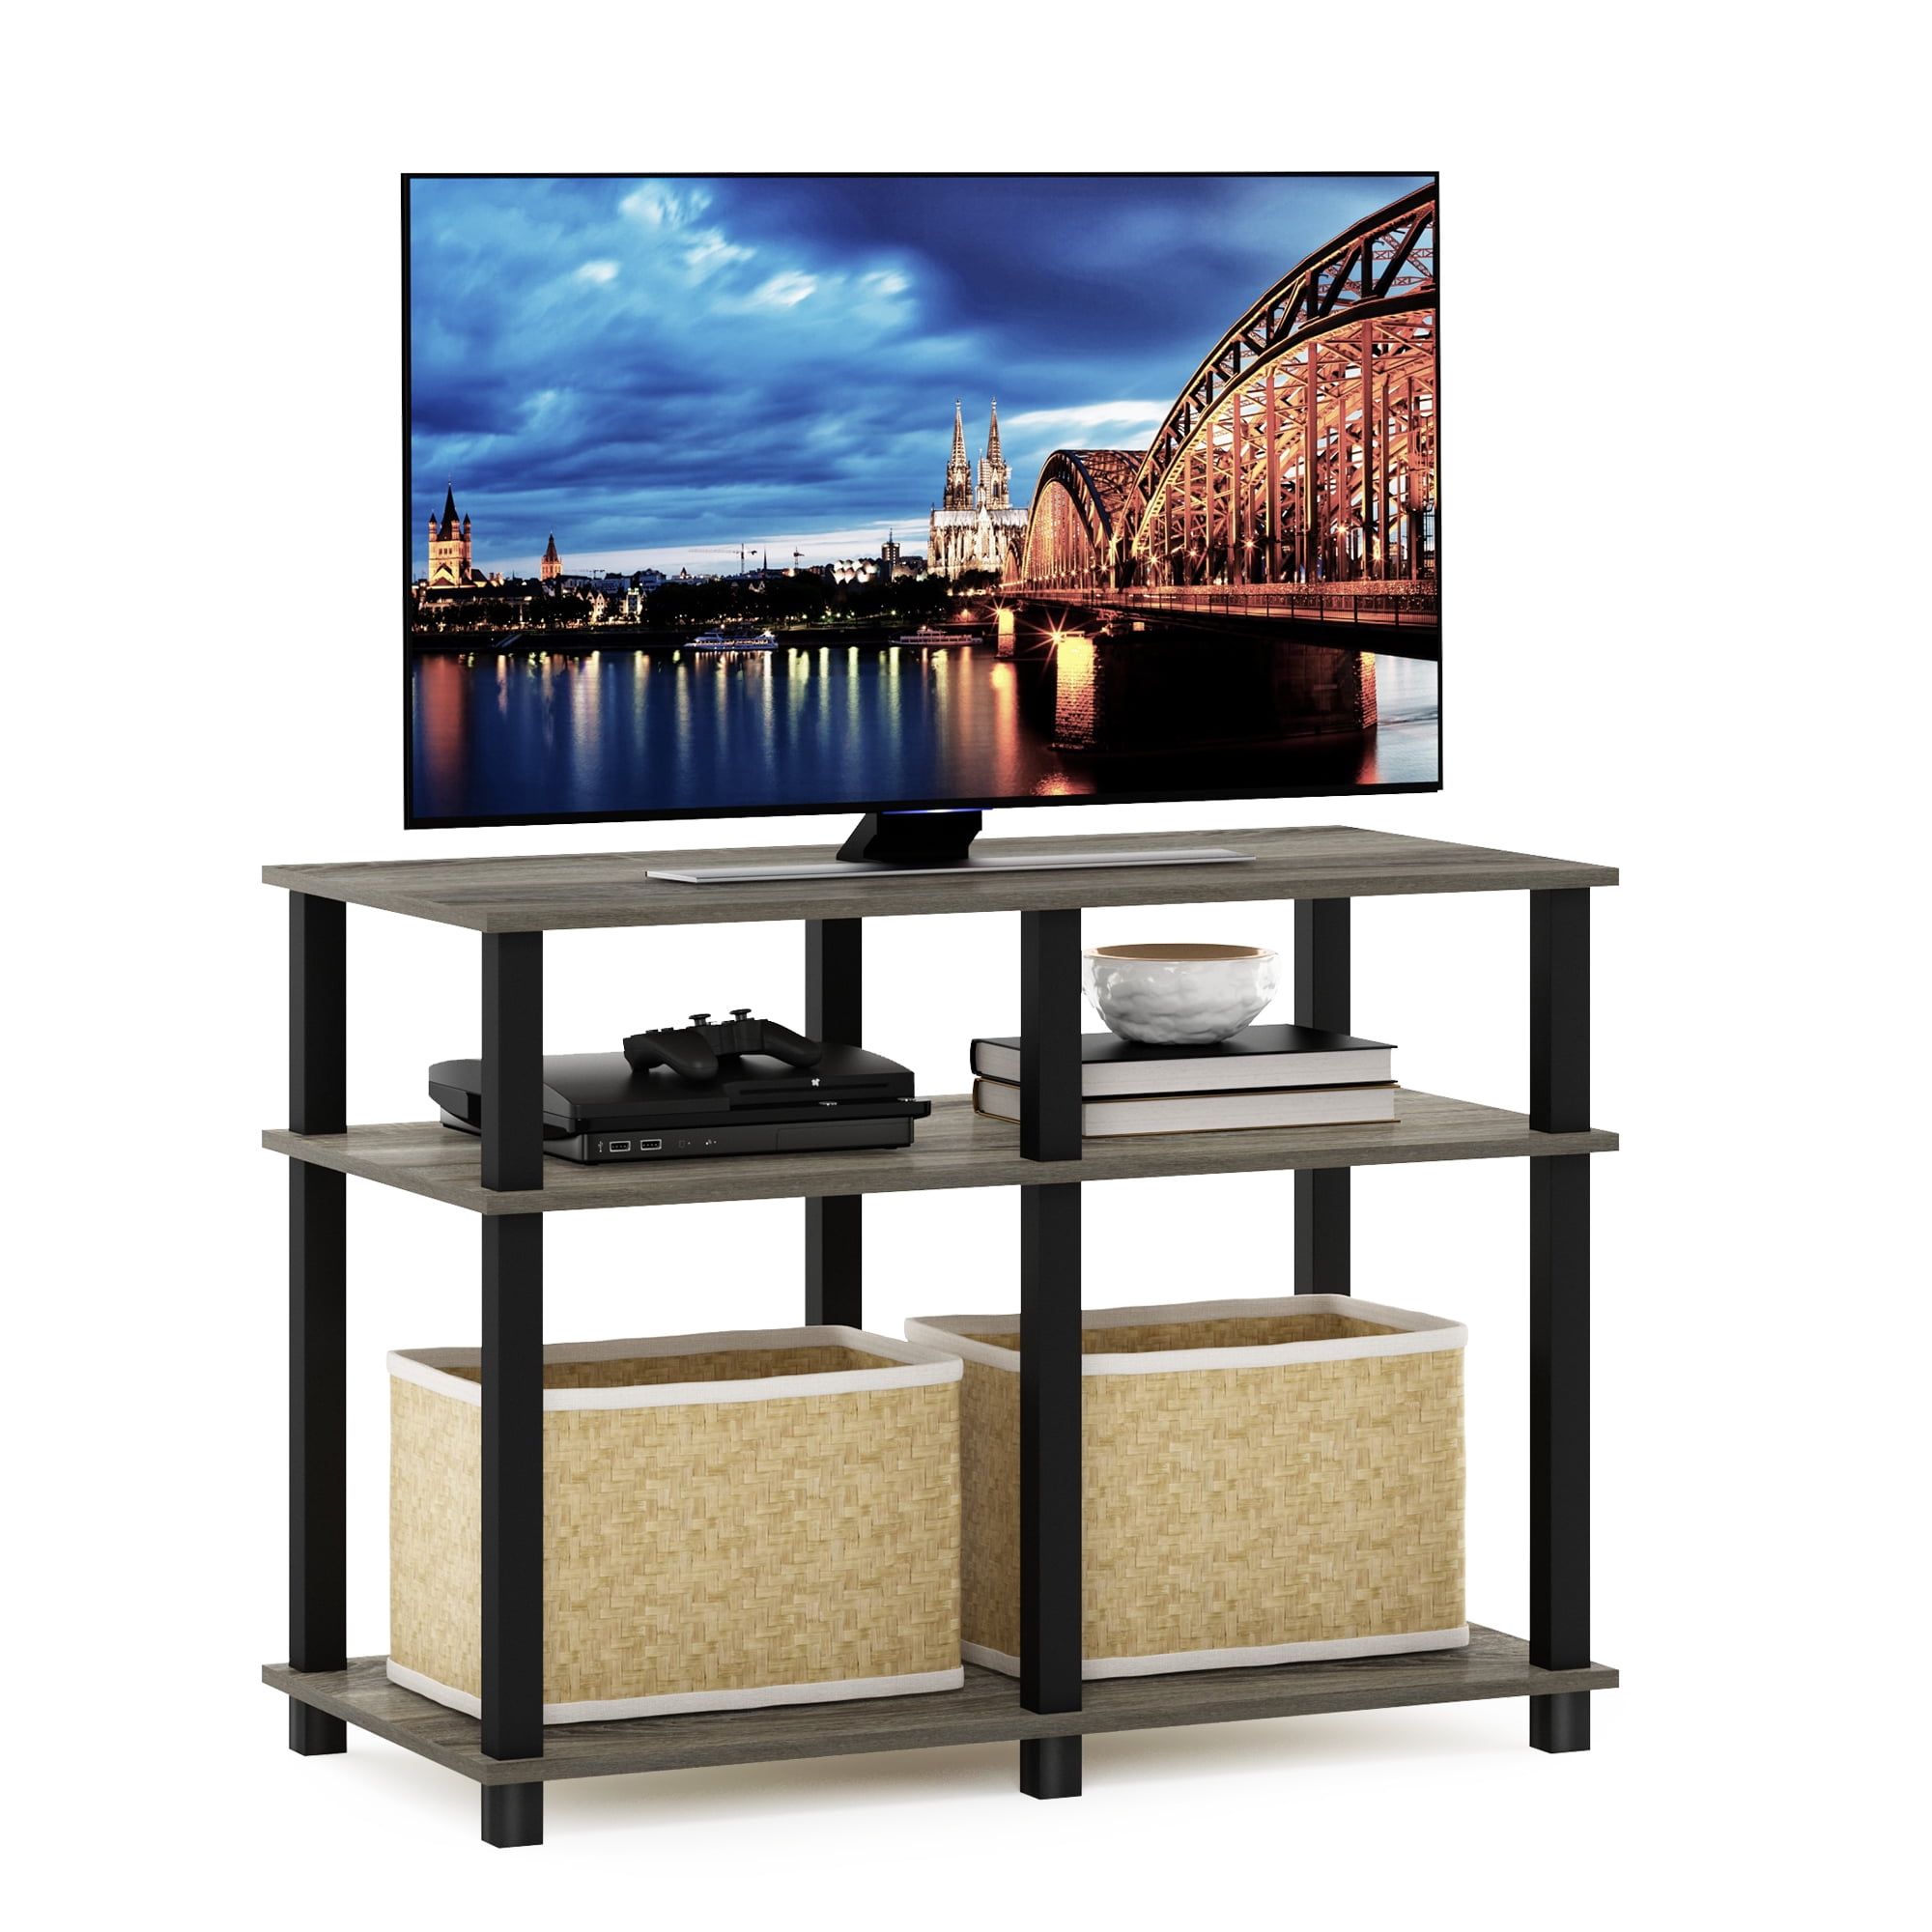 Furinno Romain Turn N Tube Tv Stand For Tv Up To 40 Inch, French Oak Inside Romain Stands For Tvs (Gallery 2 of 20)